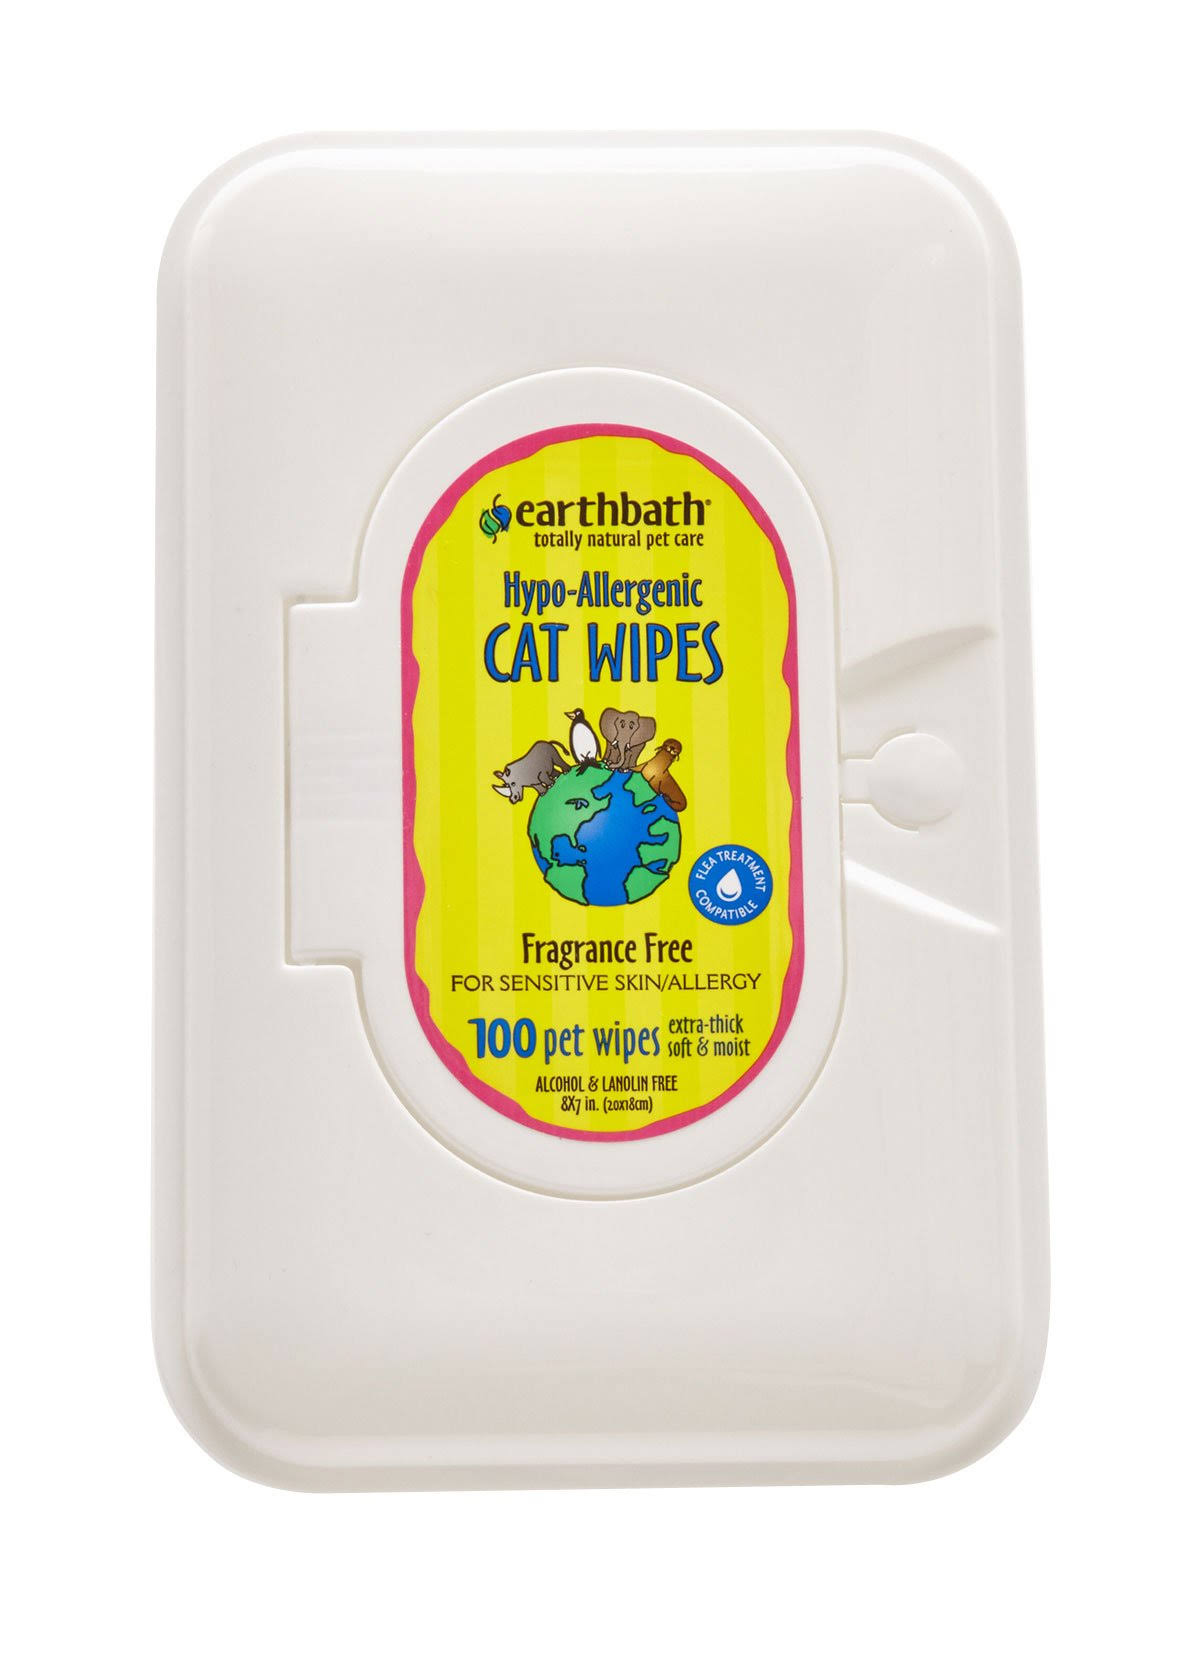 Earthbath Hypo Allergenic Cat Wipes - 100 Wipes